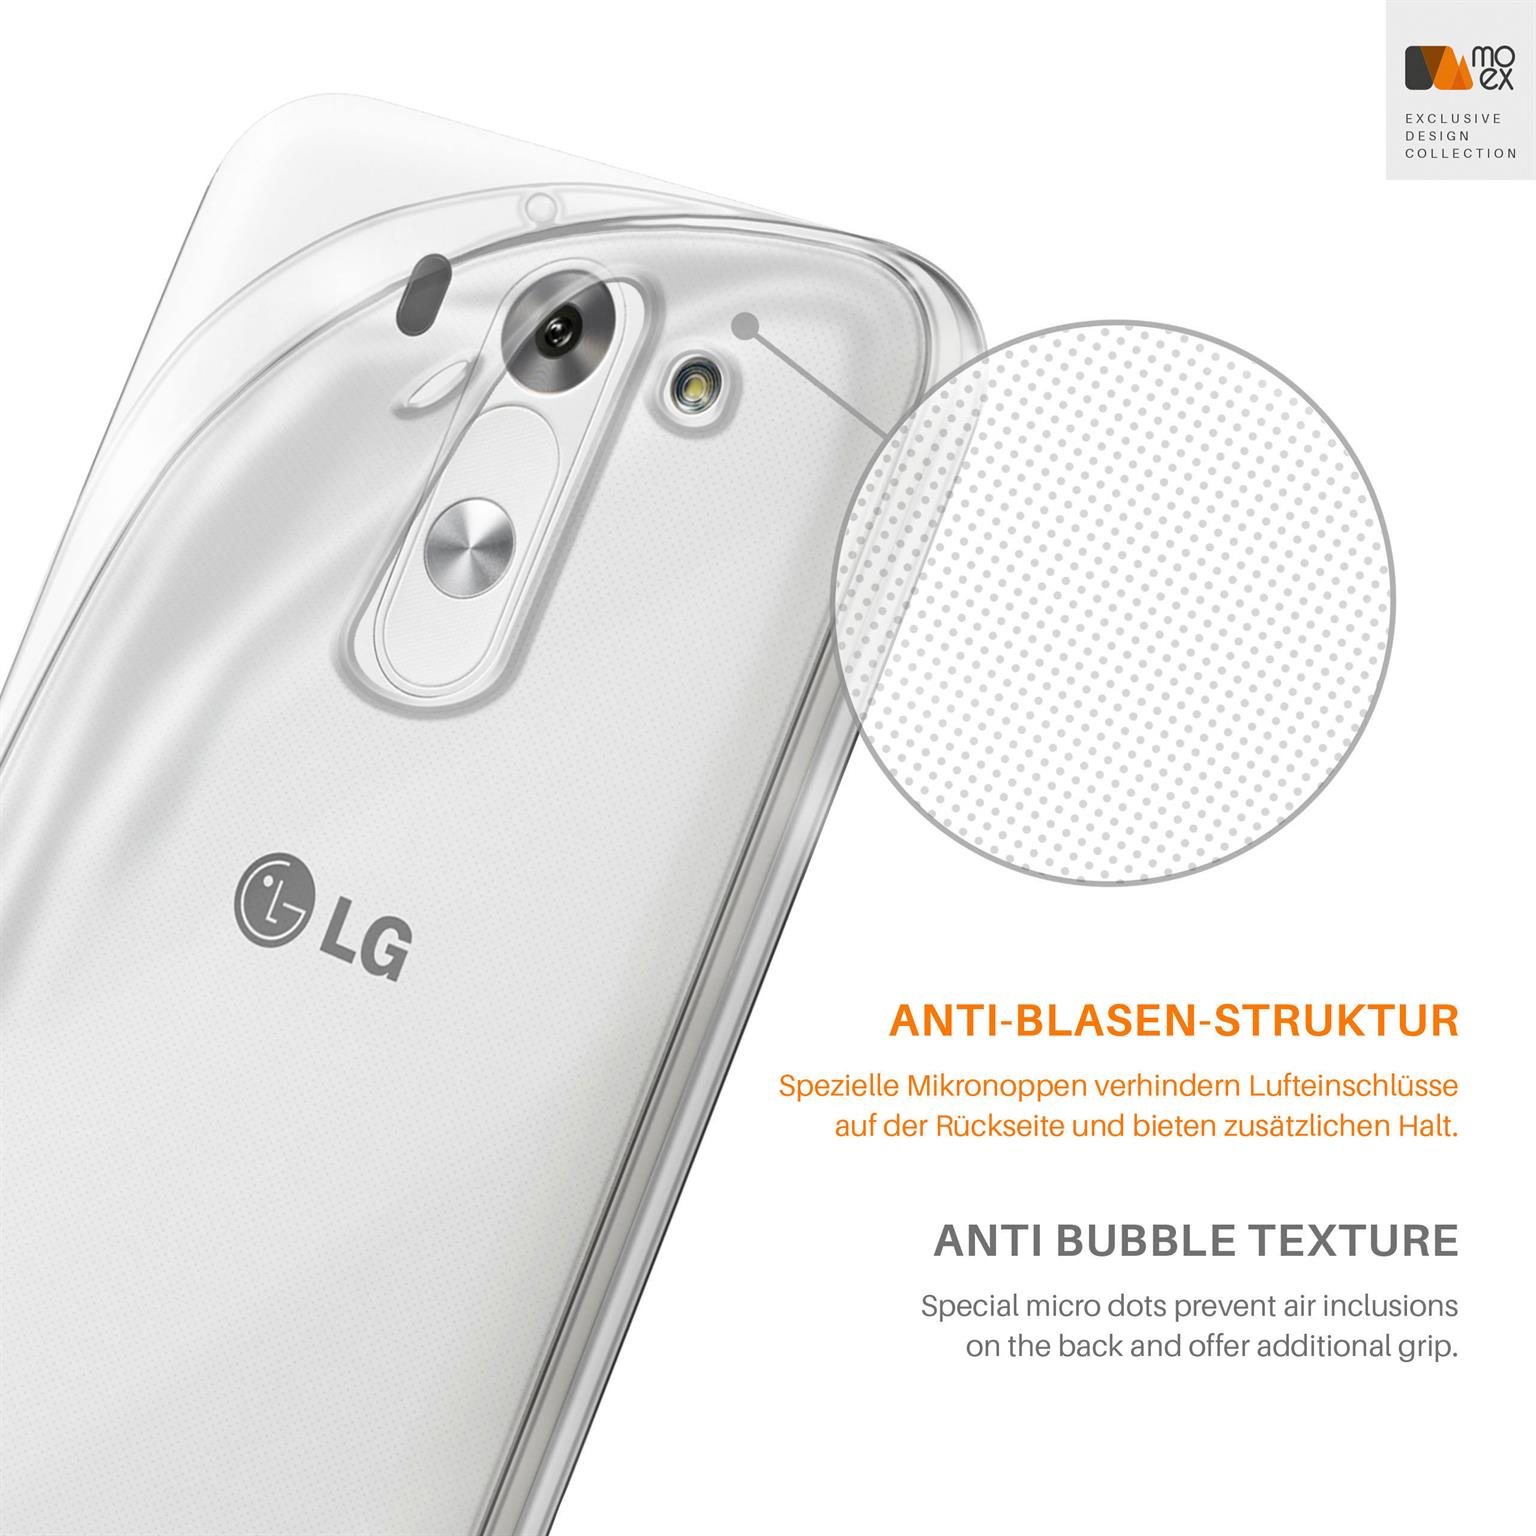 MOEX Aero LG, G3, Backcover, Crystal-Clear Case